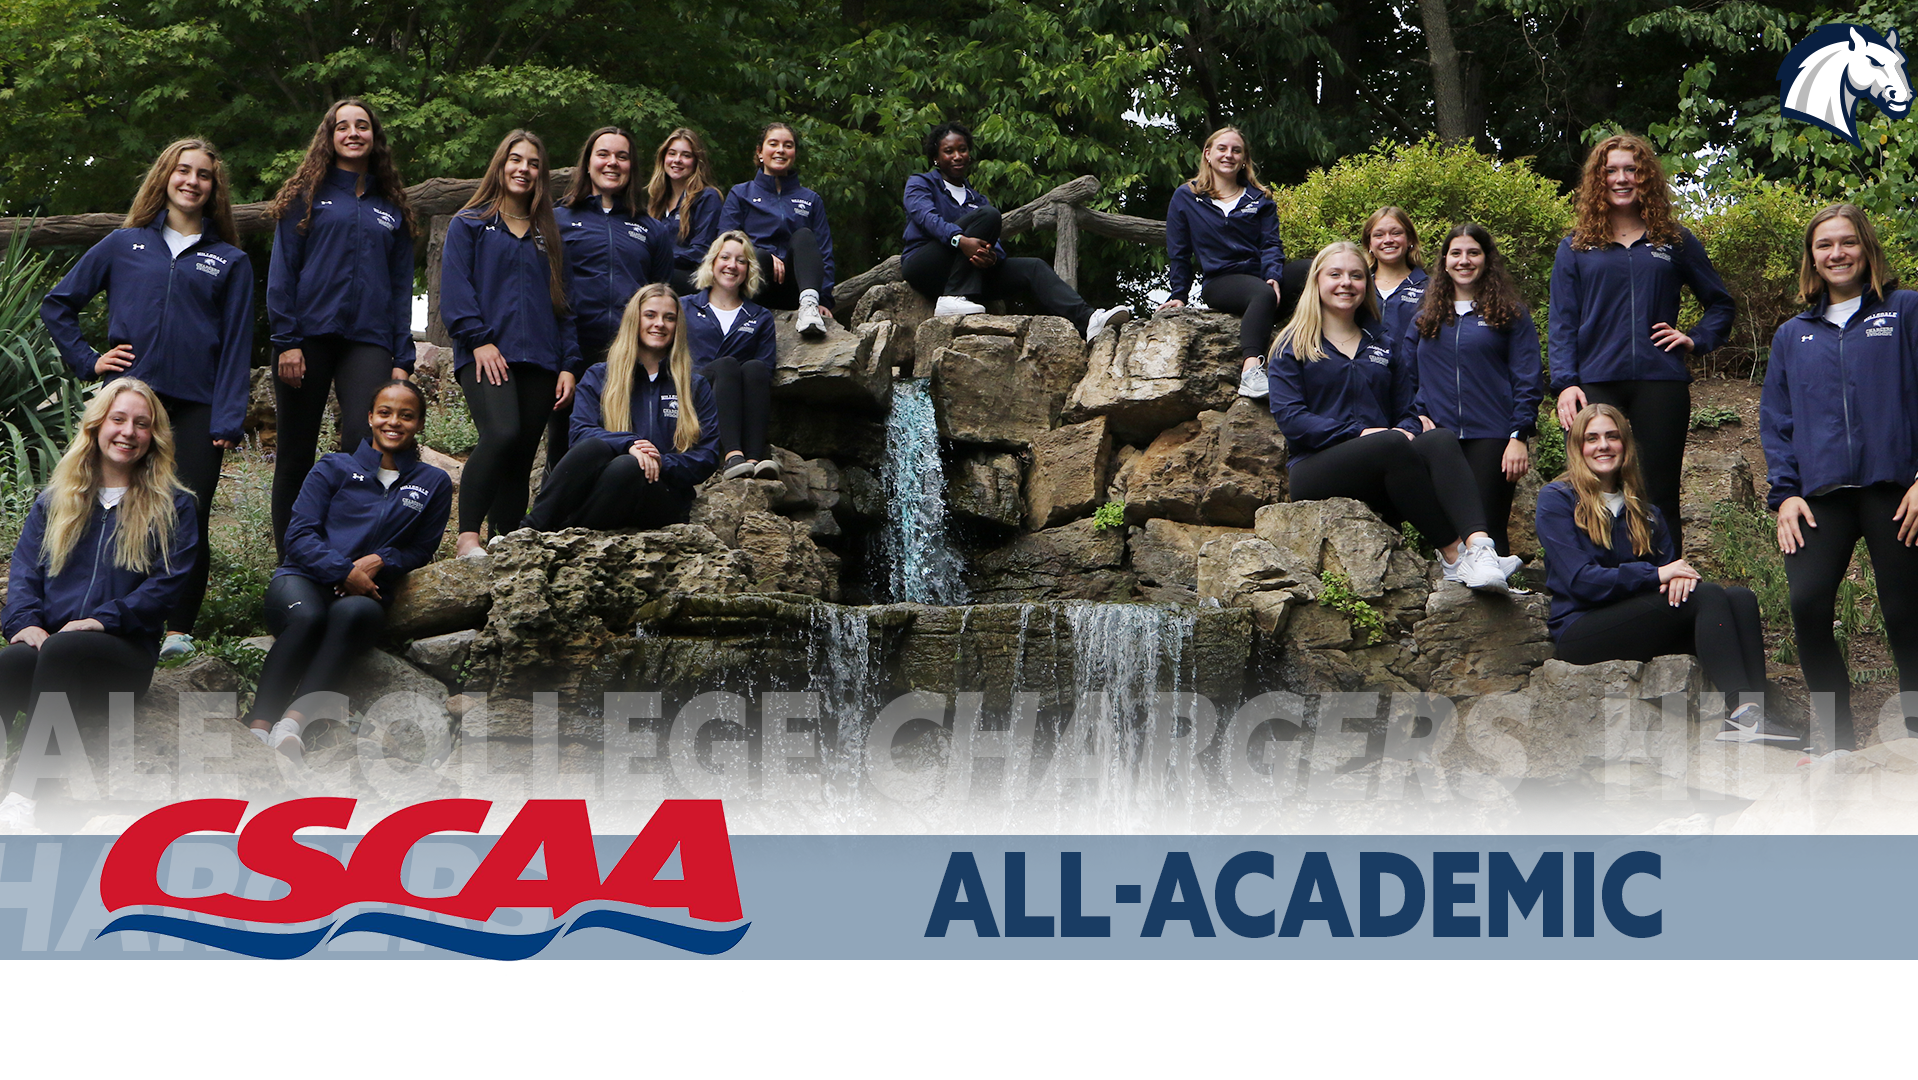 Chargers women's swim team earns 17th straight Scholar All-American honors from CSCAA